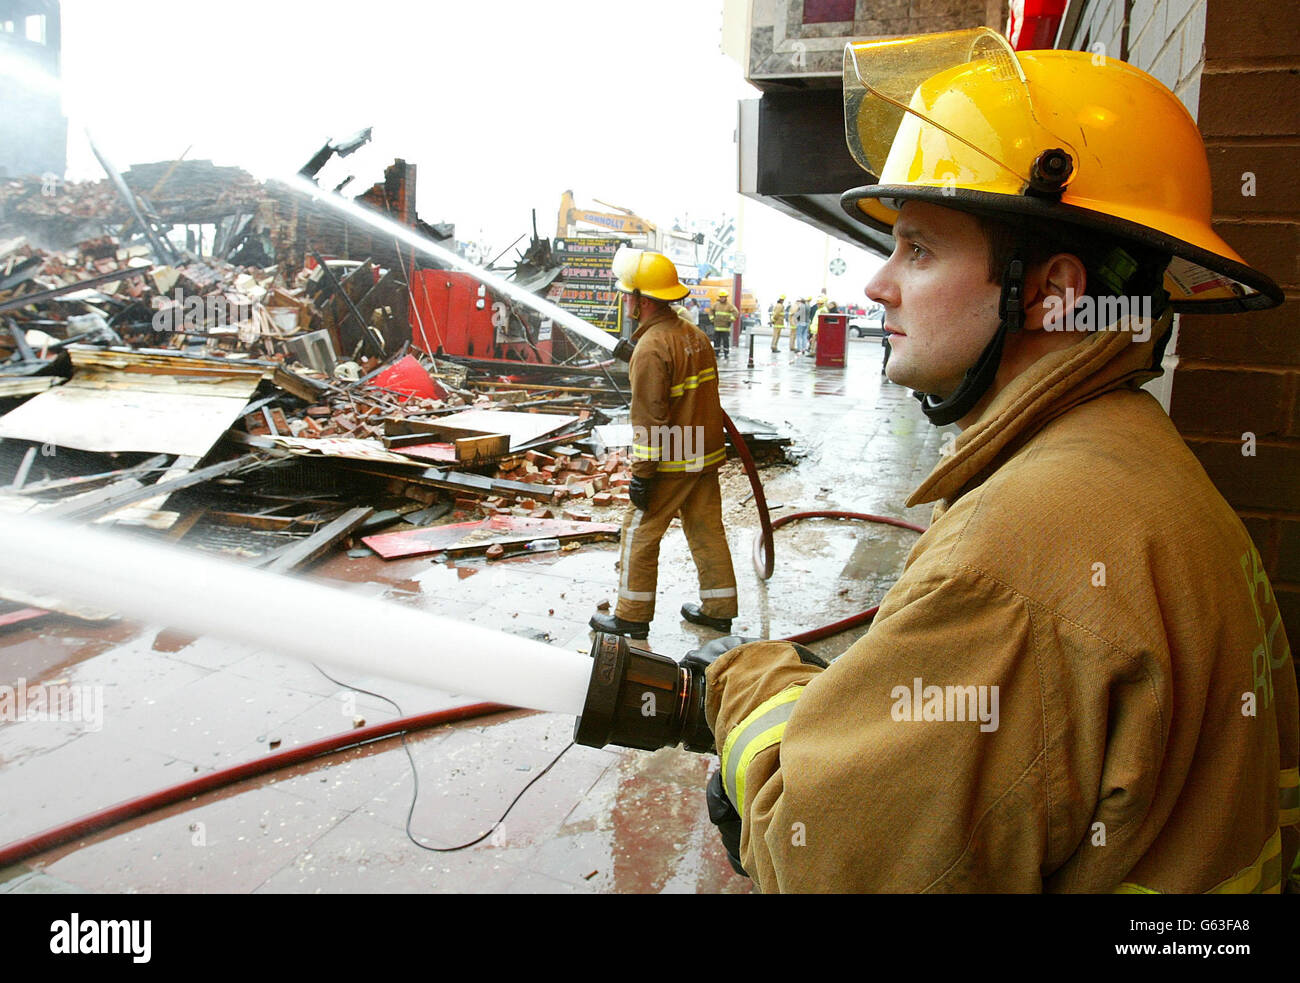 Firefighers in Blackpool bring a blaze at an amusements arcade under control. Thirty people were evacuated from their homes after firefighters forced their way into the the Grab City complex, which includes a Madame Tussaud's wax museum. * ... on Blackpool's south promenade after the blaze was discovered in the early hours of this morning. It was not yet known if the cause of the fire was suspicious police said. 26/10/02 : The Fire Brigades Union announced that strikes planned for next week have been suspended while fresh talks are held with employers. Stock Photo